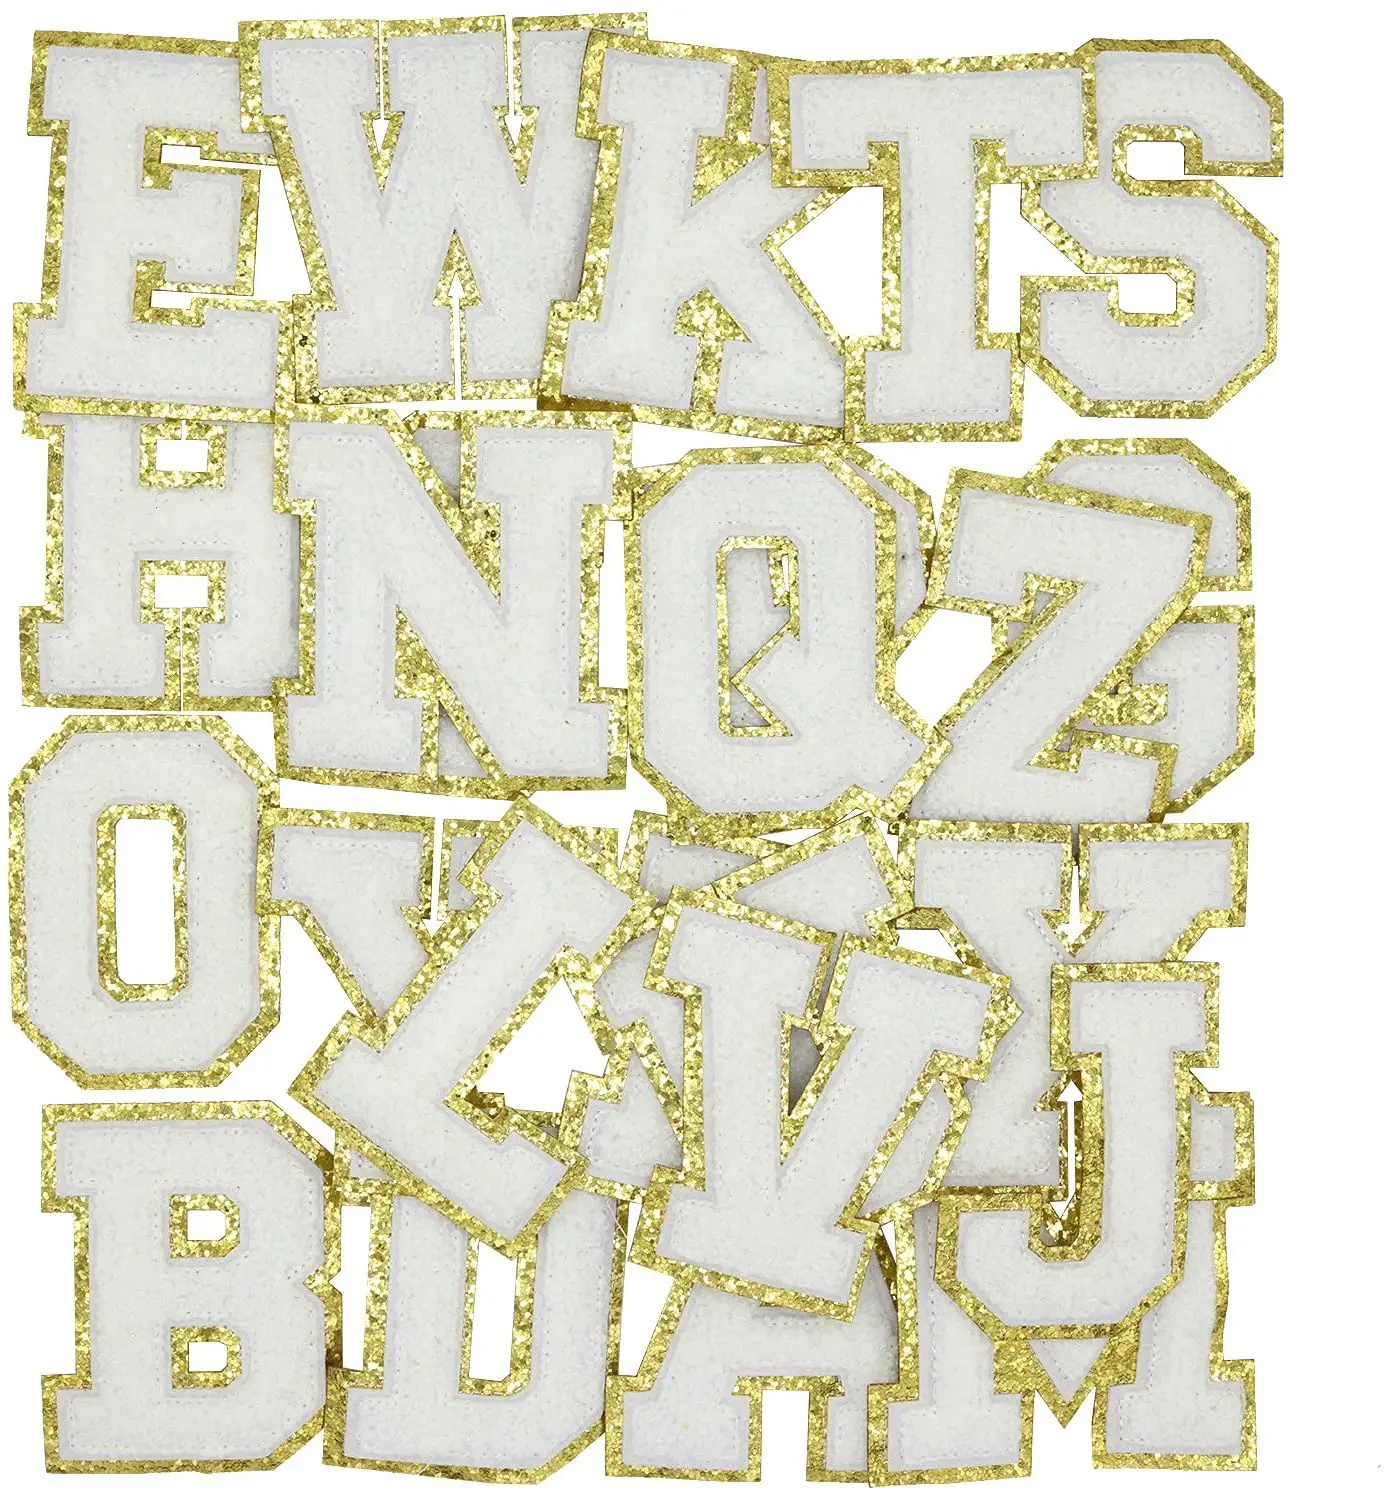 

White Varsity Chenille English Letter A-Z Iron Repair Patches Alphabet Sewing Appliques Diy Name Clothing Badges With Gold Glitt